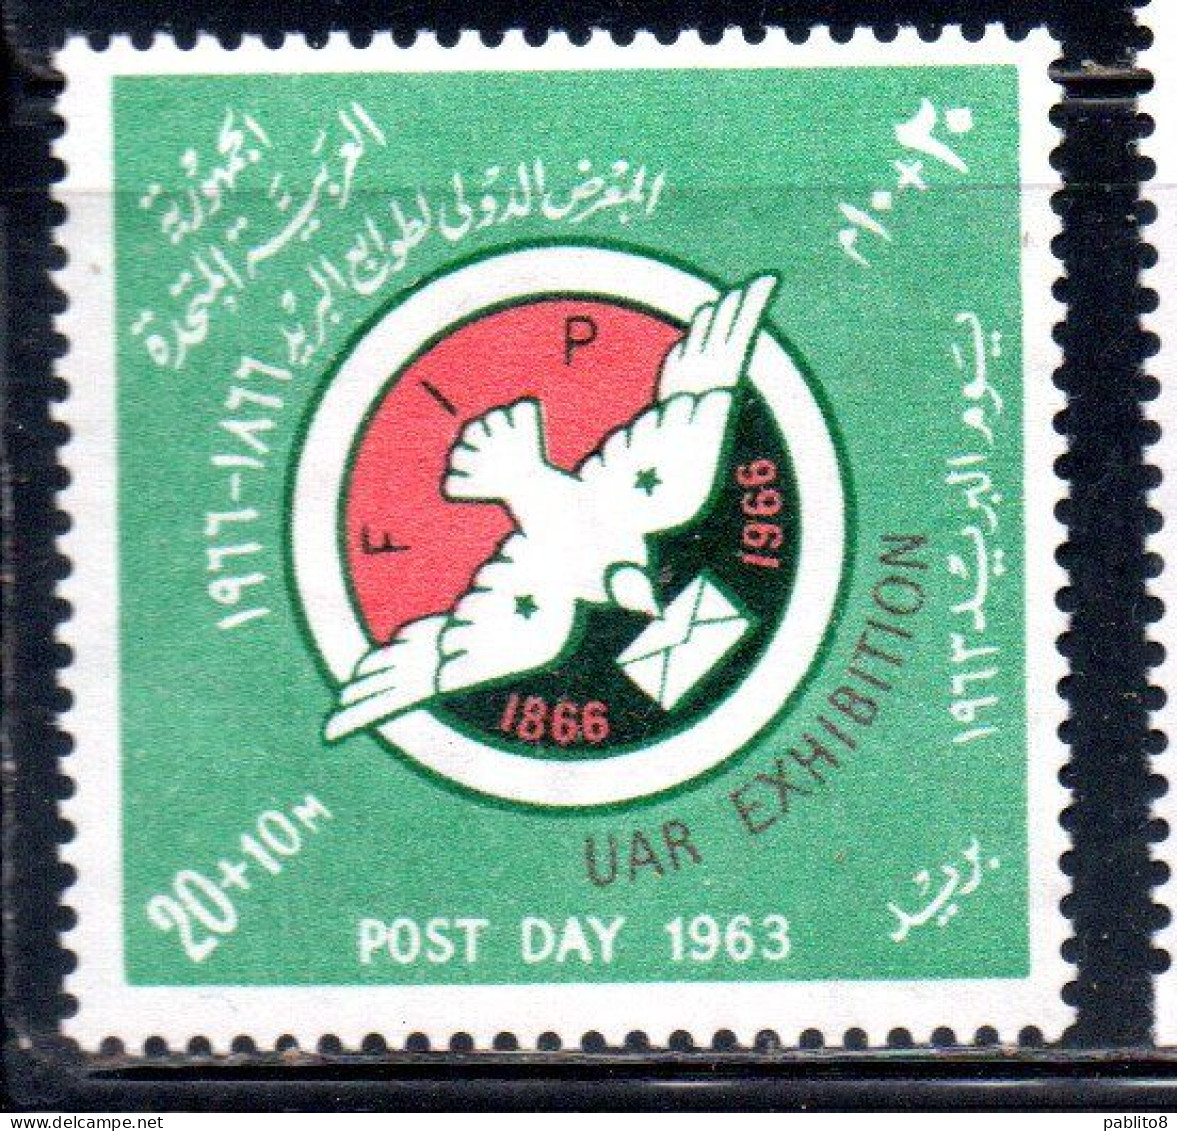 UAR EGYPT EGITTO 1963 POST DAY AND STAMP EXHIBITION 1966 OF THE FIP 20m + 10m MNH - Nuevos